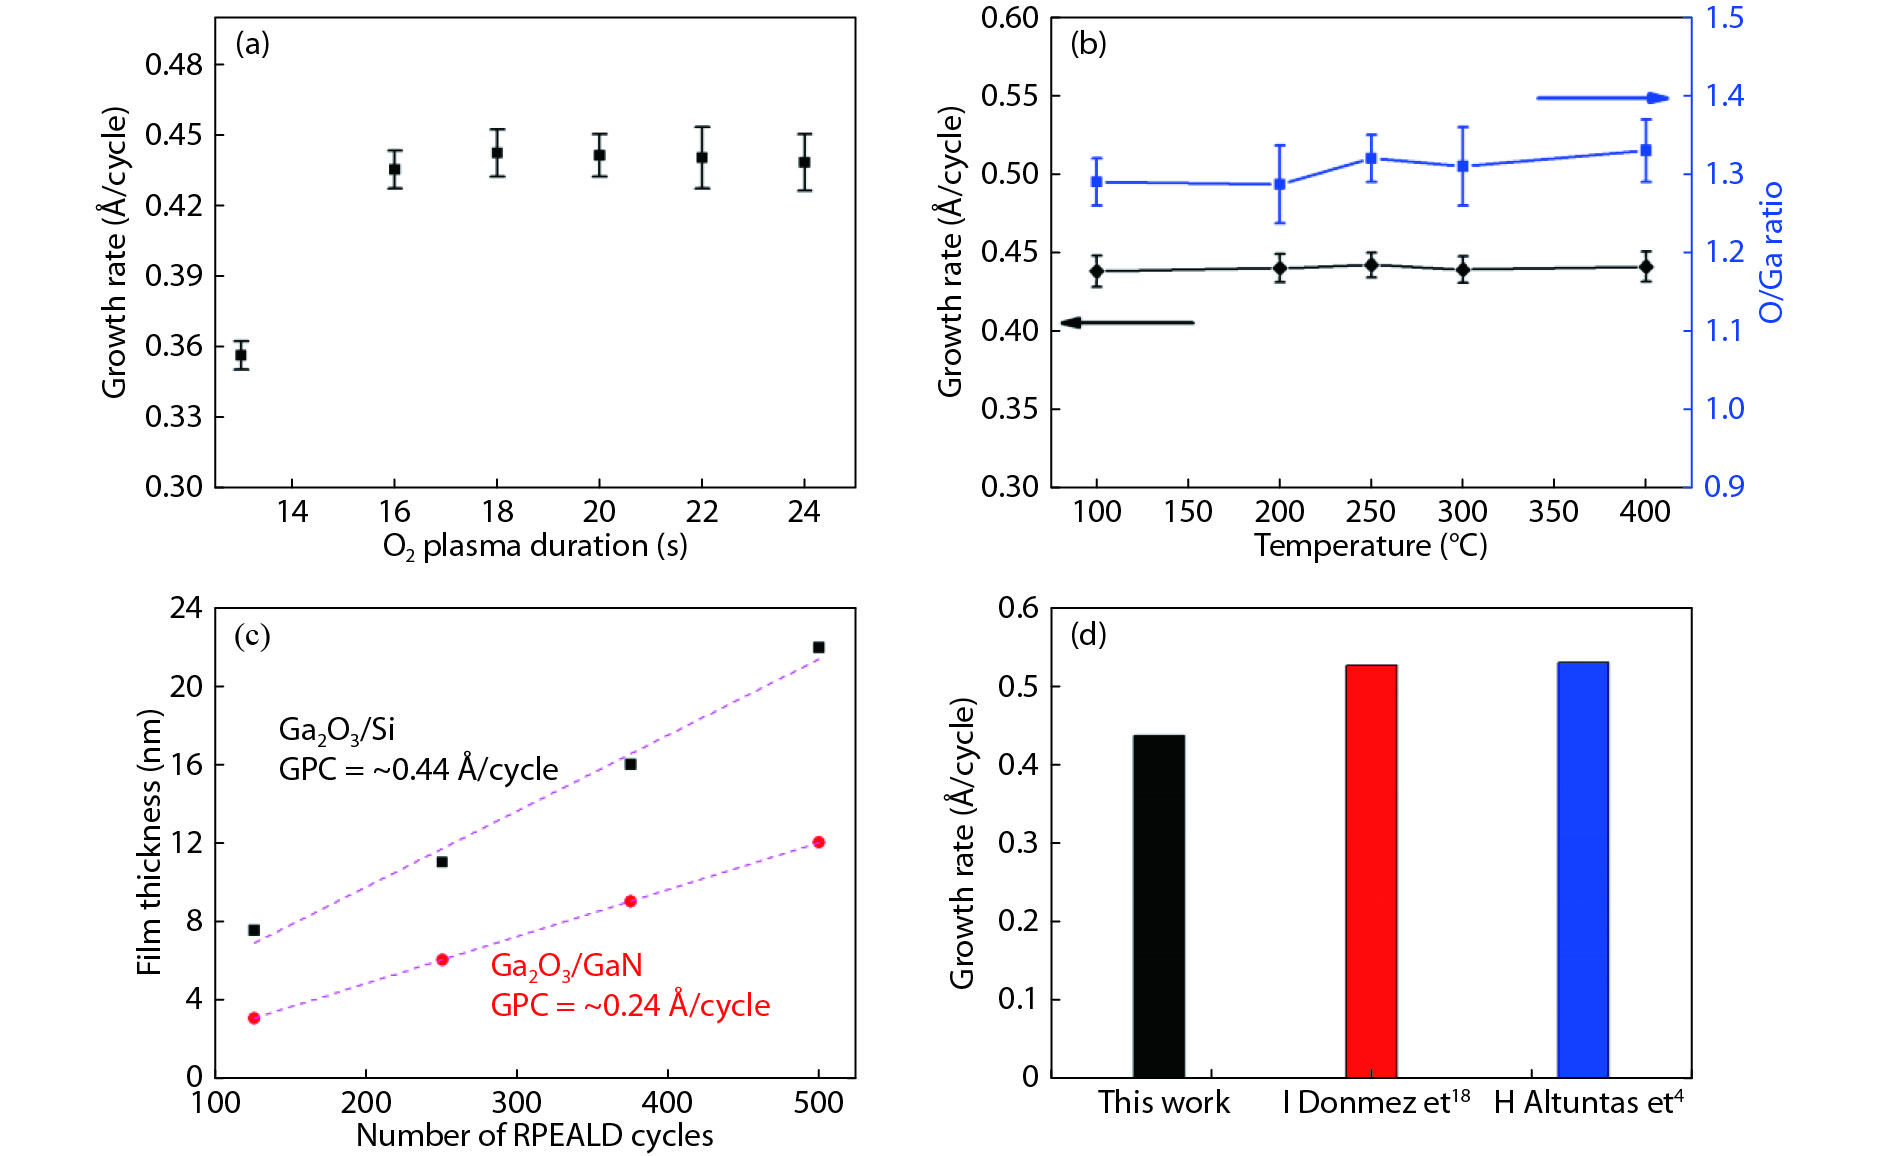 (Color online) (a) Growth rate of Ga2O3 films on Si as a function of O2 plasma flow duration at 250 °C. (b) Growth rate and O/Ga ratio of Ga2O3 films on Si as a function of temperature. (c) The Ga2O3 thin films thickness as a function of the number of RPEALD cycles. (d) A comparison of Ga2O3 deposition rates on Si between this work and the reported literatures.